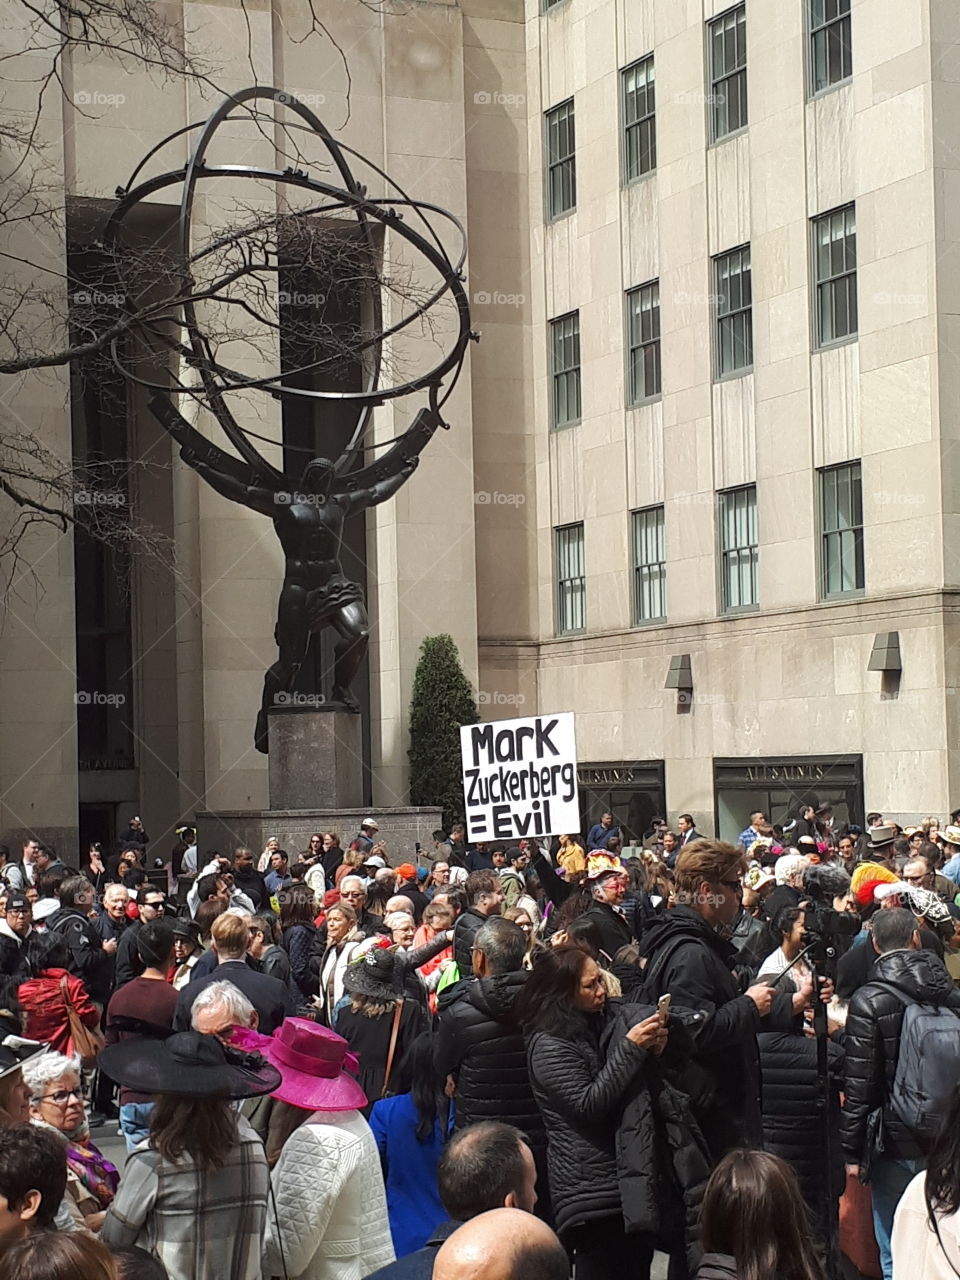 NYC parade / protest!